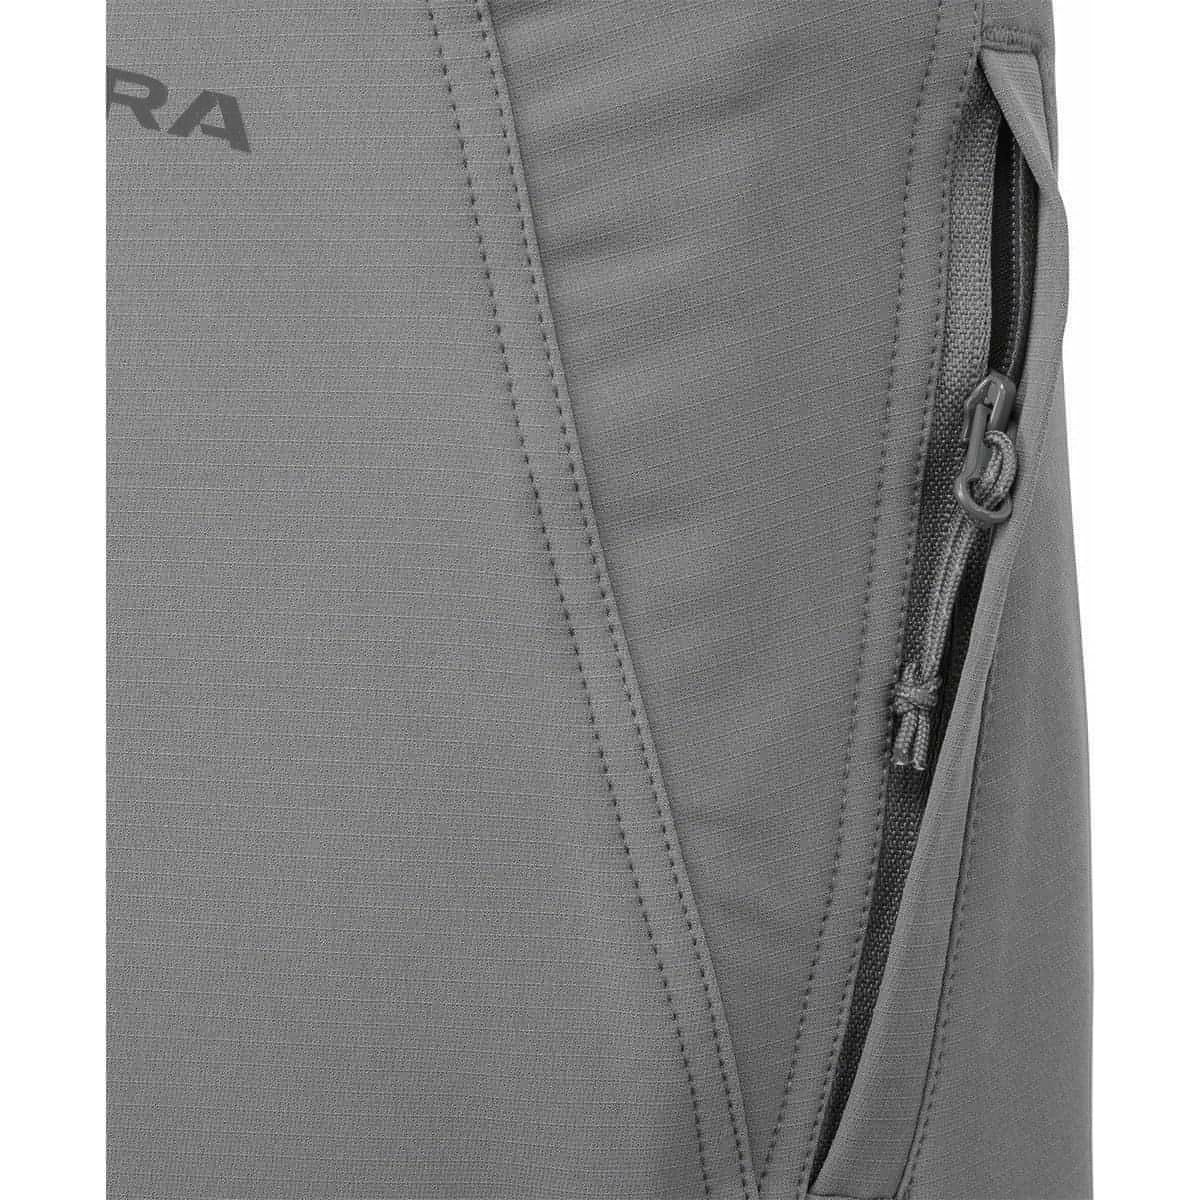 Altura All Roads Repel Womens Cycling Shorts - Grey - Start Fitness